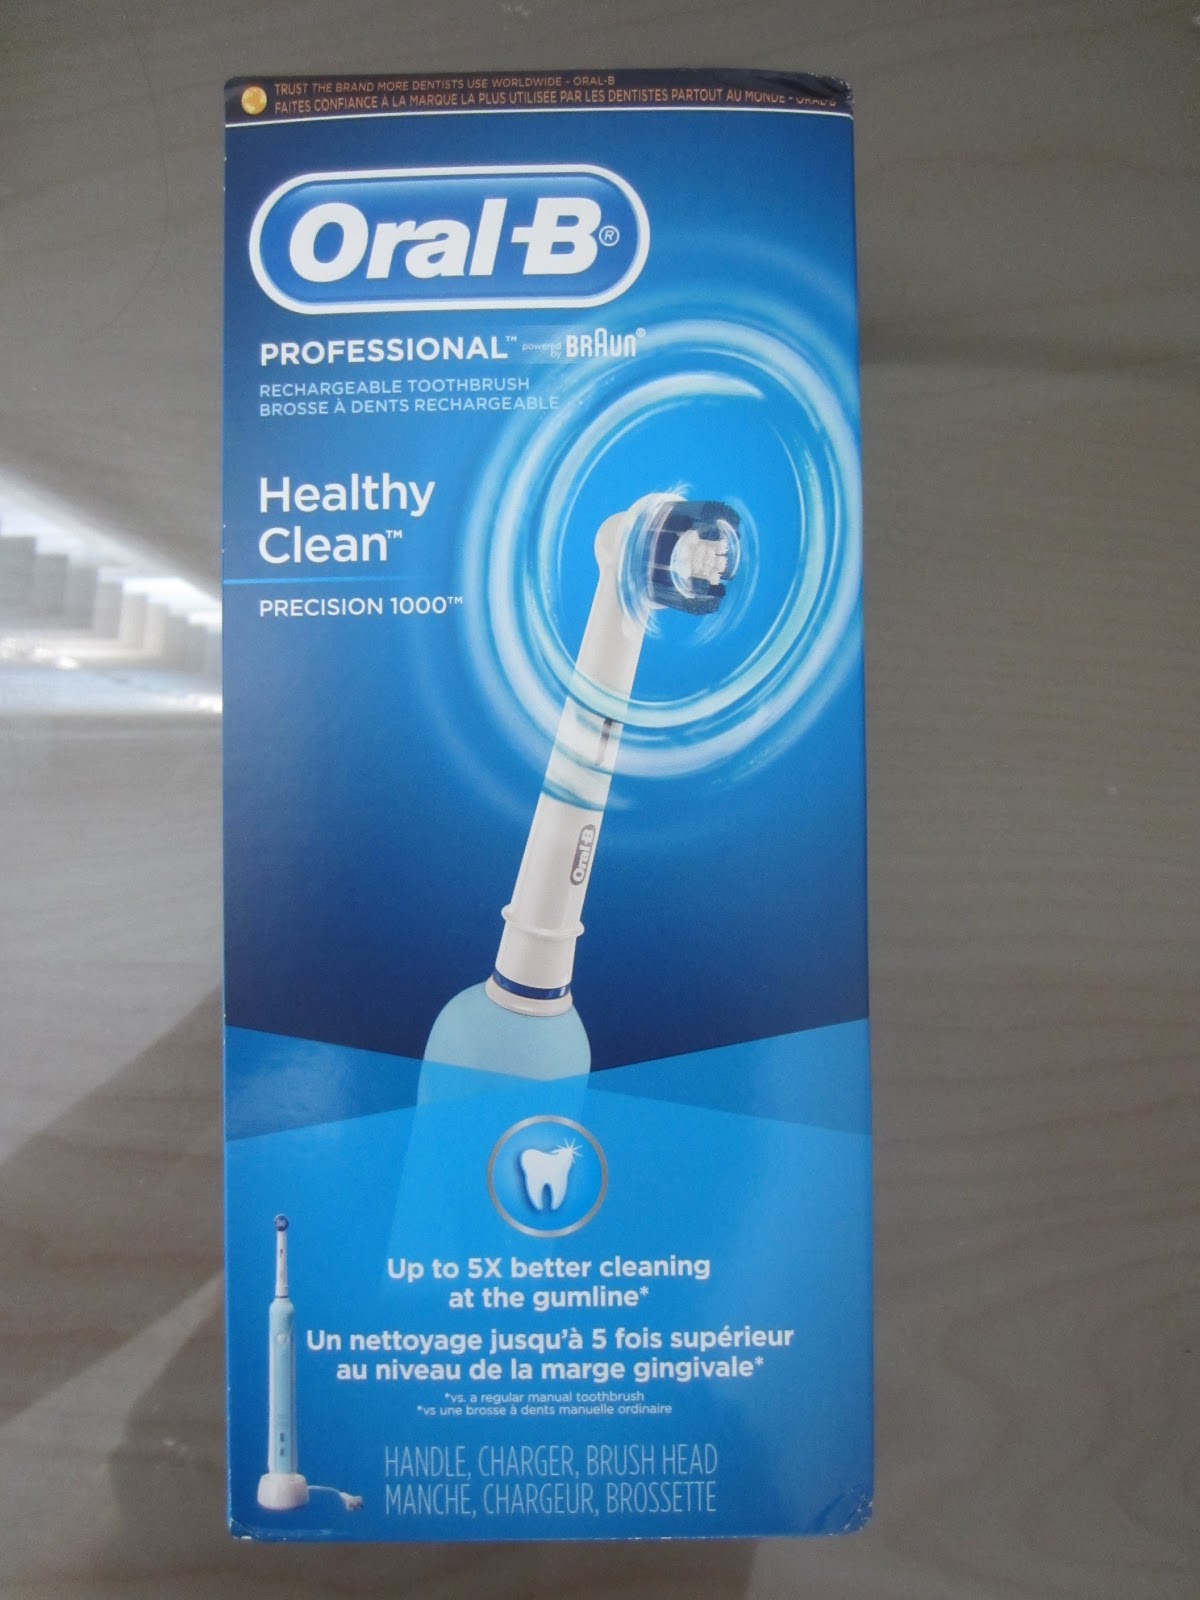 oral-b-pro-white-1000-power-rechargeable-electric-toothbrush-powered-by